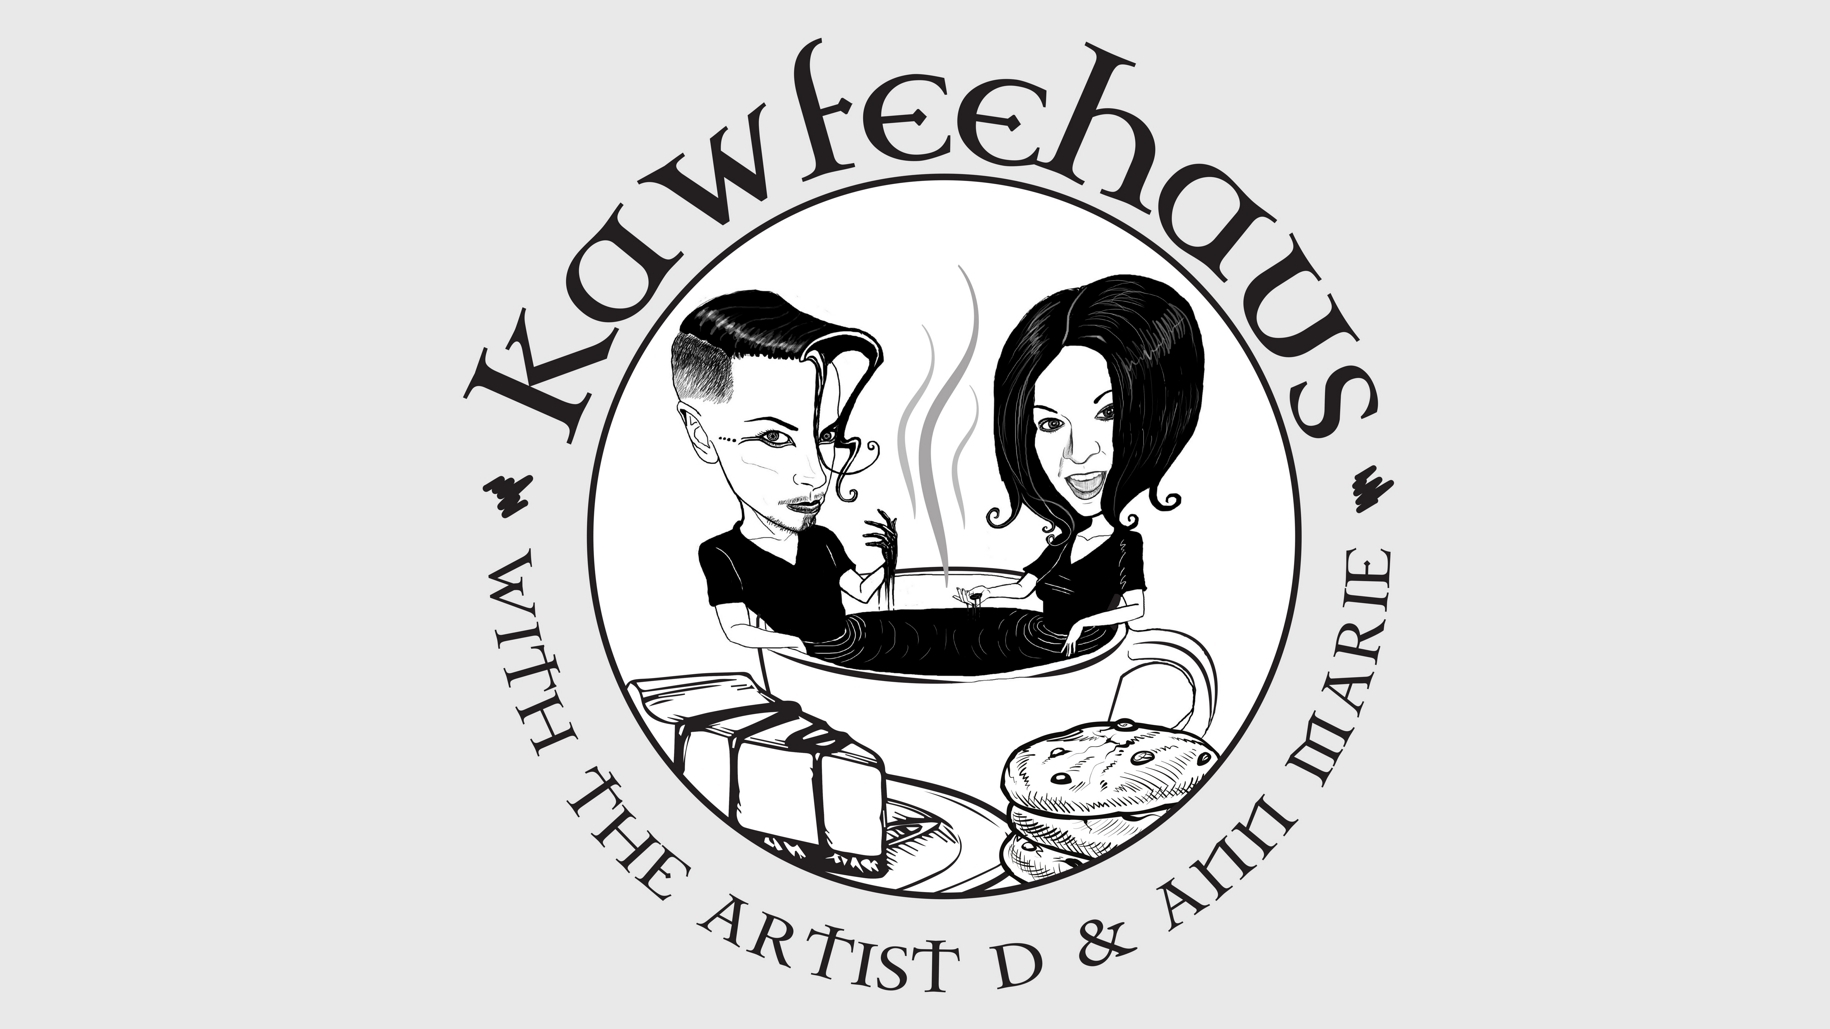 Kawfeehaus with The Artist D and Ann Marie